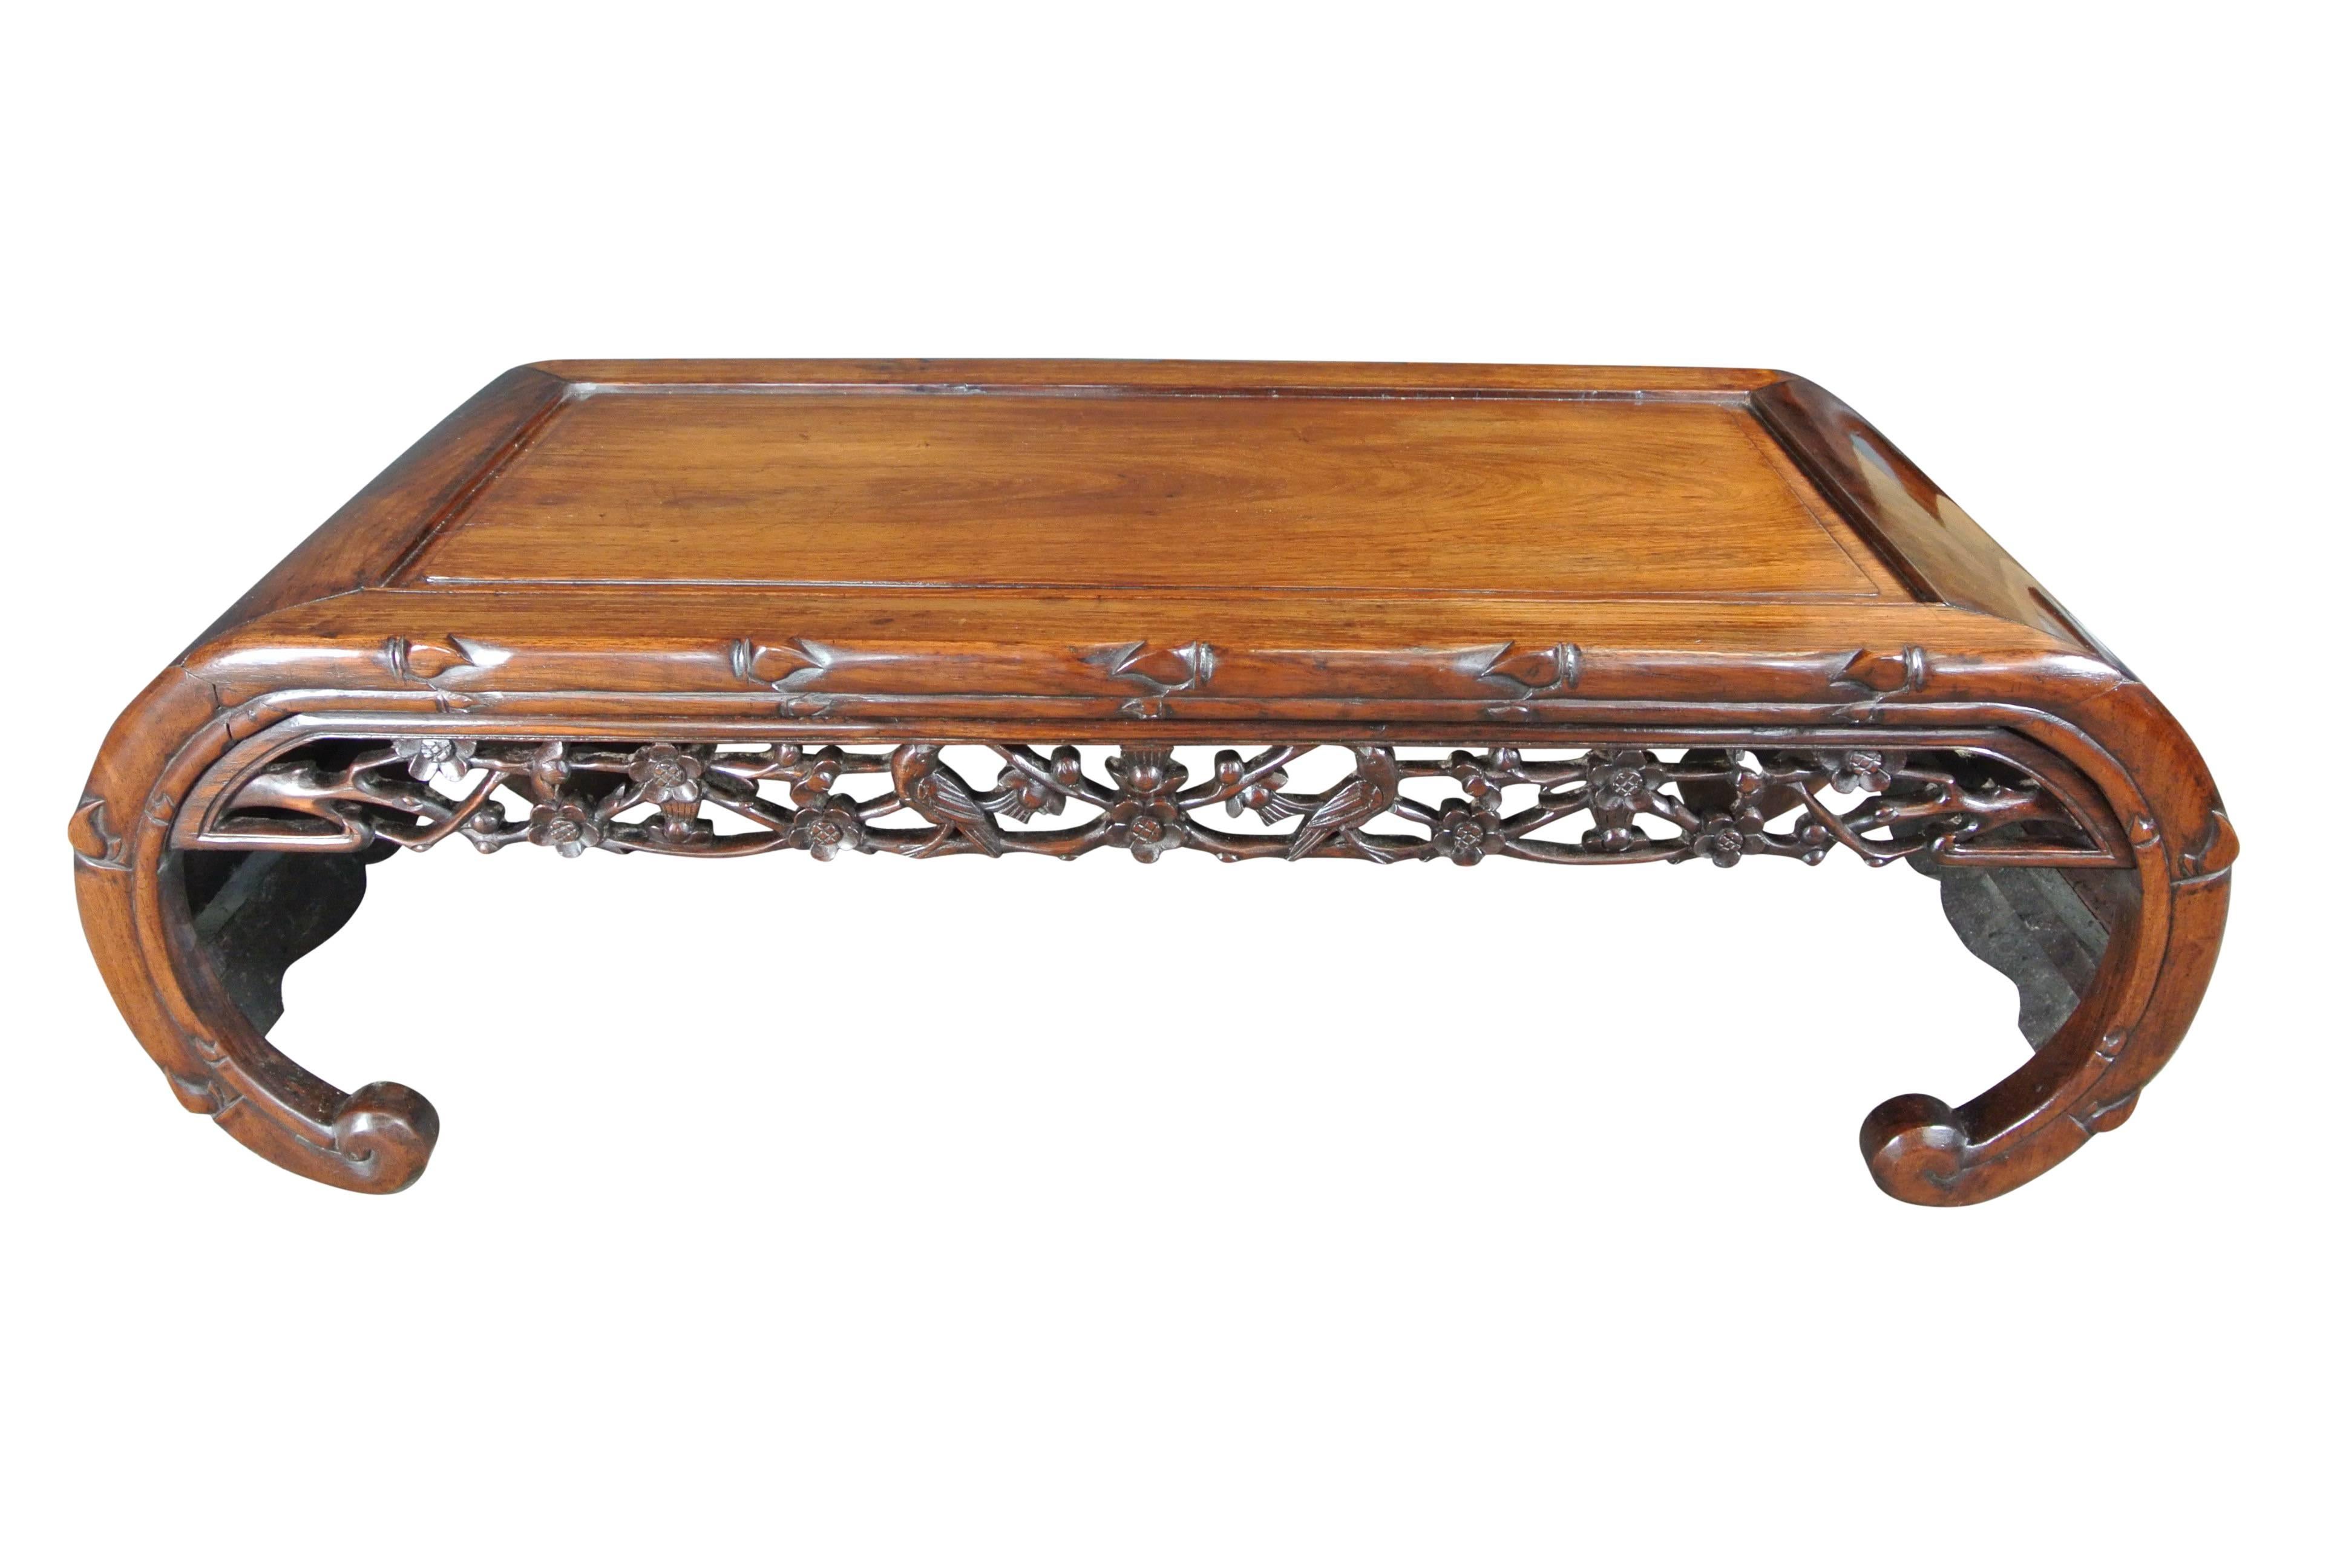 Early 20th century beautifully figured hardwood opium or coffee table with carved decoration to the sides and decorative open fretwork to the front and back.